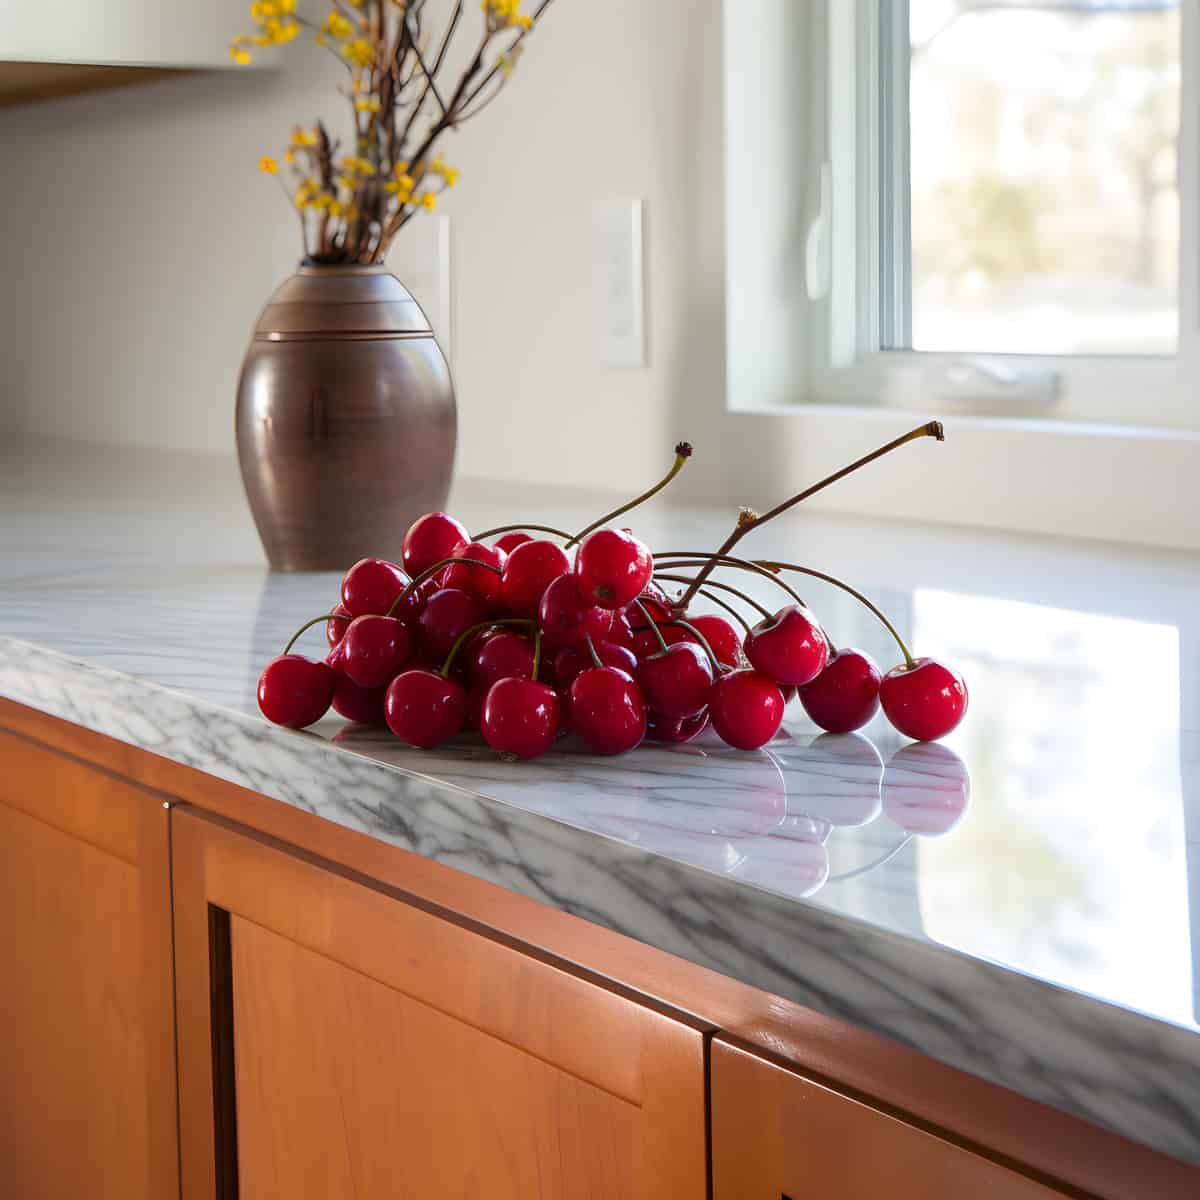 Pin Cherries on a kitchen counter